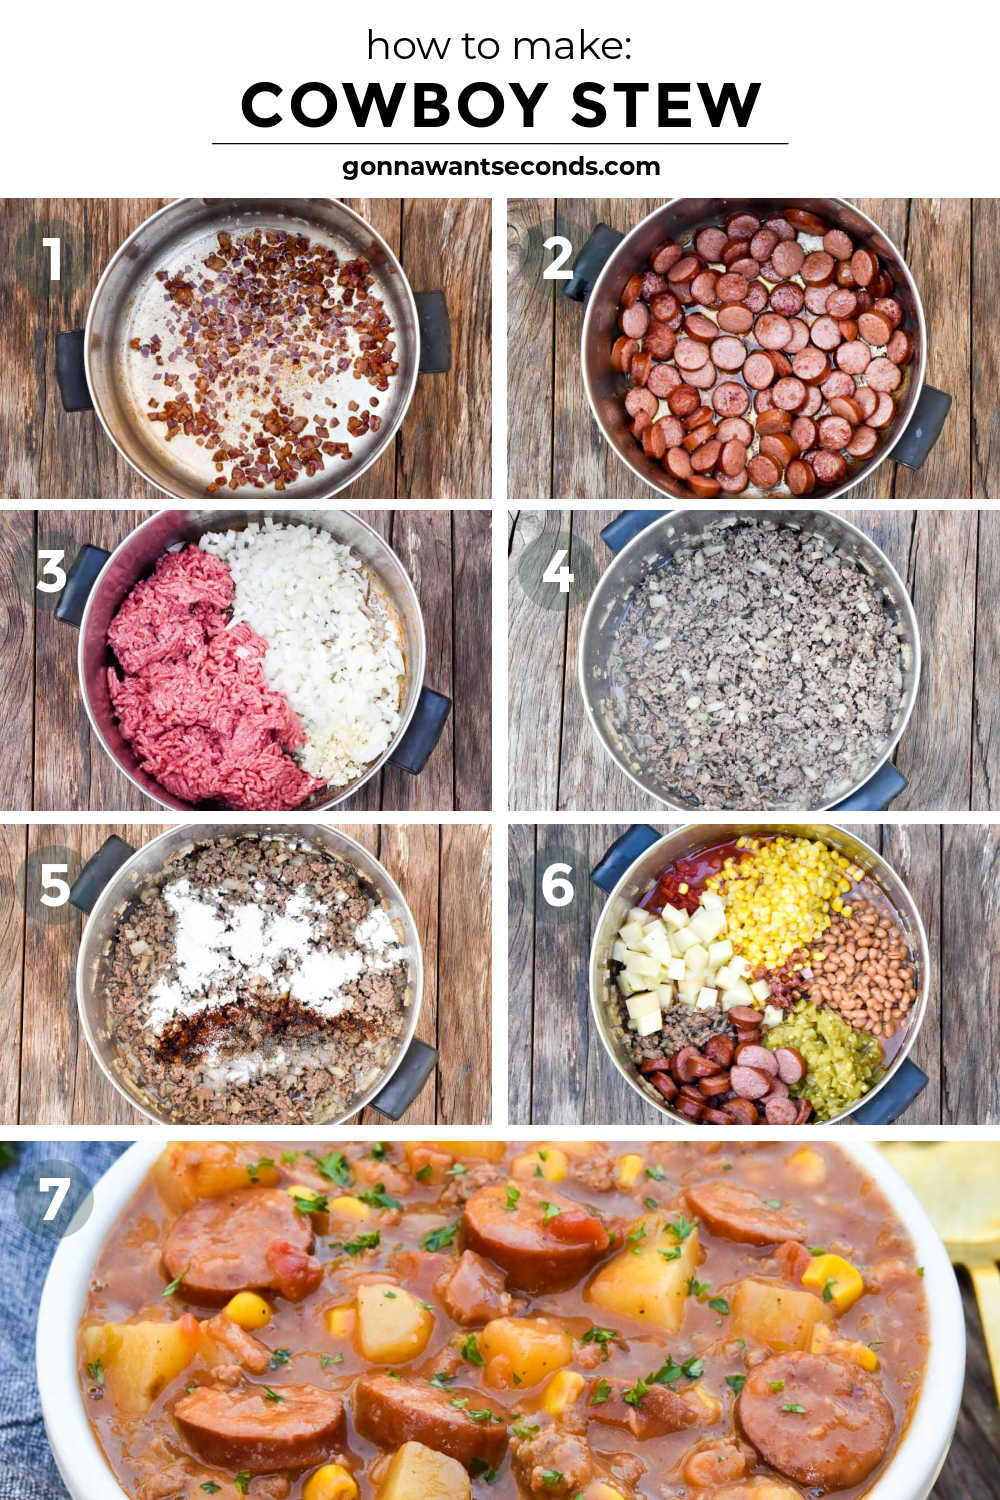 Step by step how to make cowboy stew